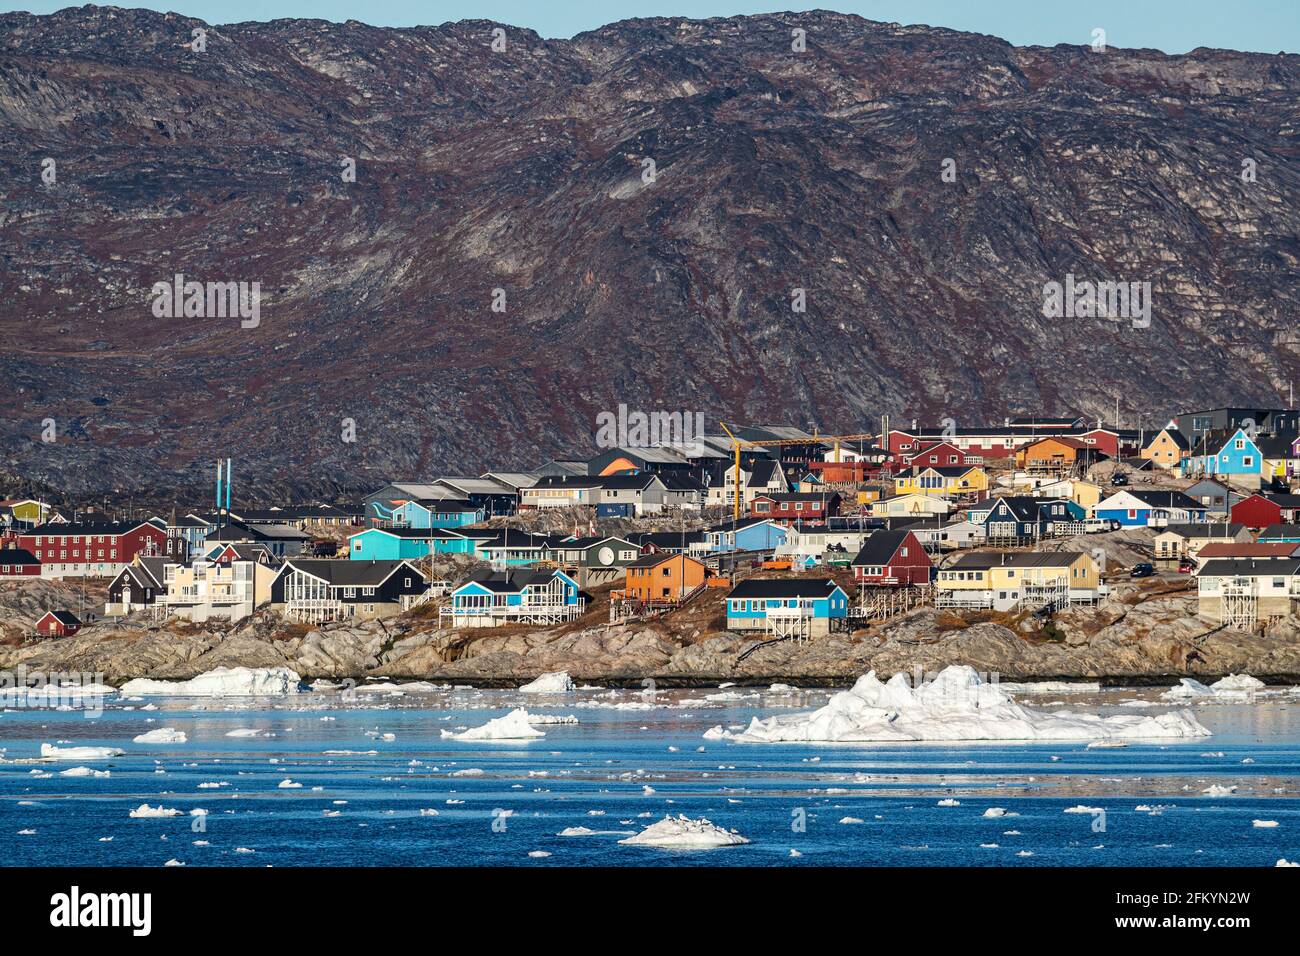 View from the outer bay of the third largest city in Greenland, Ilulissat or Jakobshavn, Greenland. Stock Photo